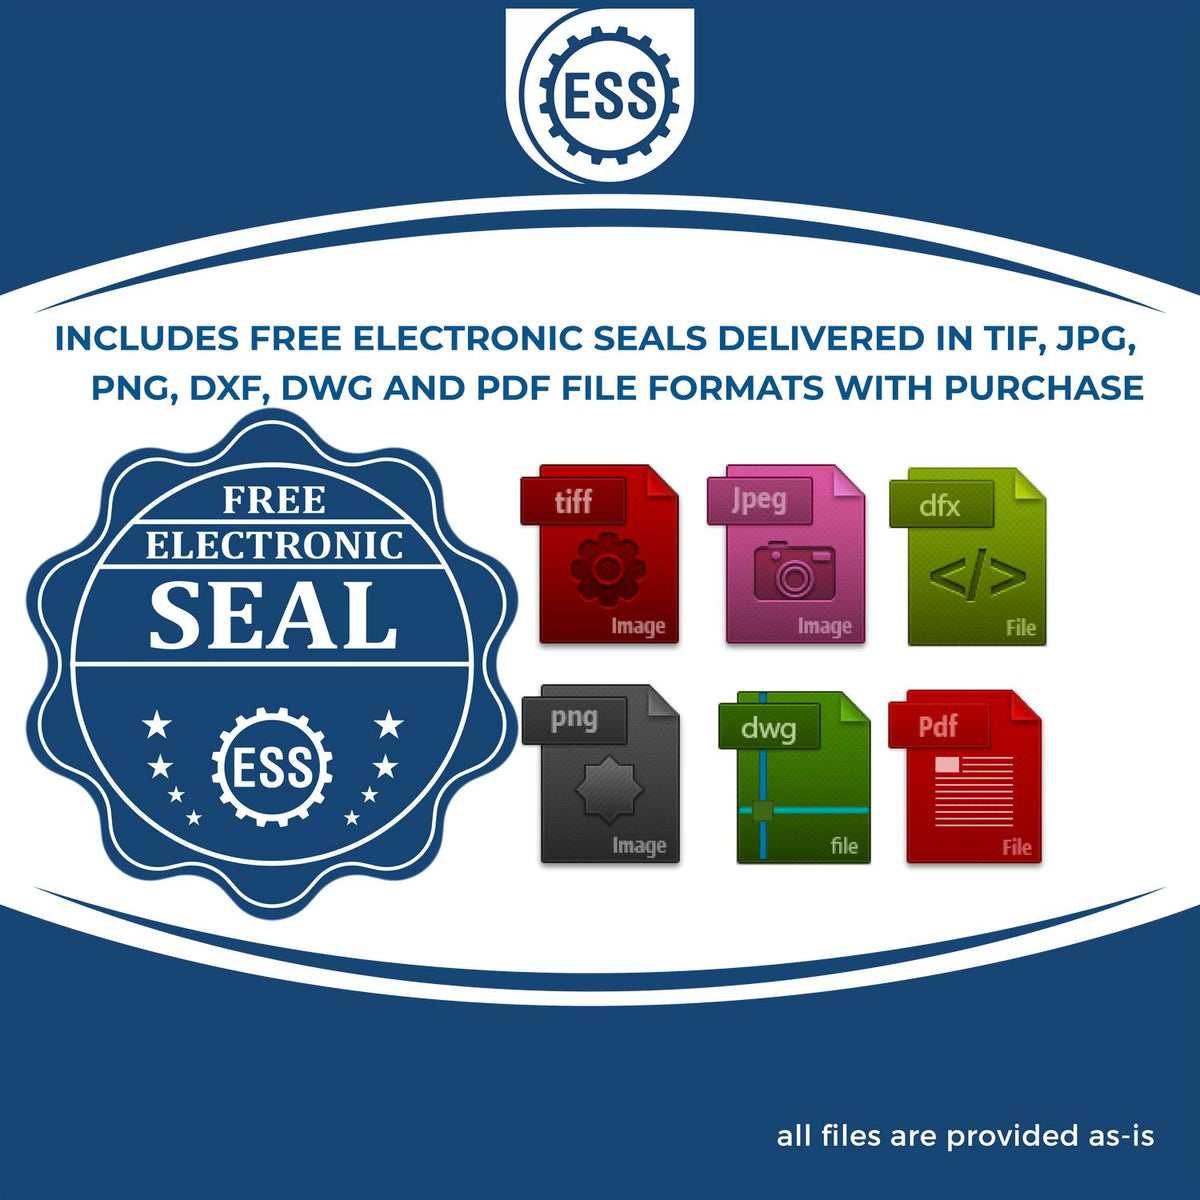 An infographic for the free electronic seal for the MaxLight Premium Pre-Inked Arizona State Seal Notarial Stamp illustrating the different file type icons such as DXF, DWG, TIF, JPG and PNG.